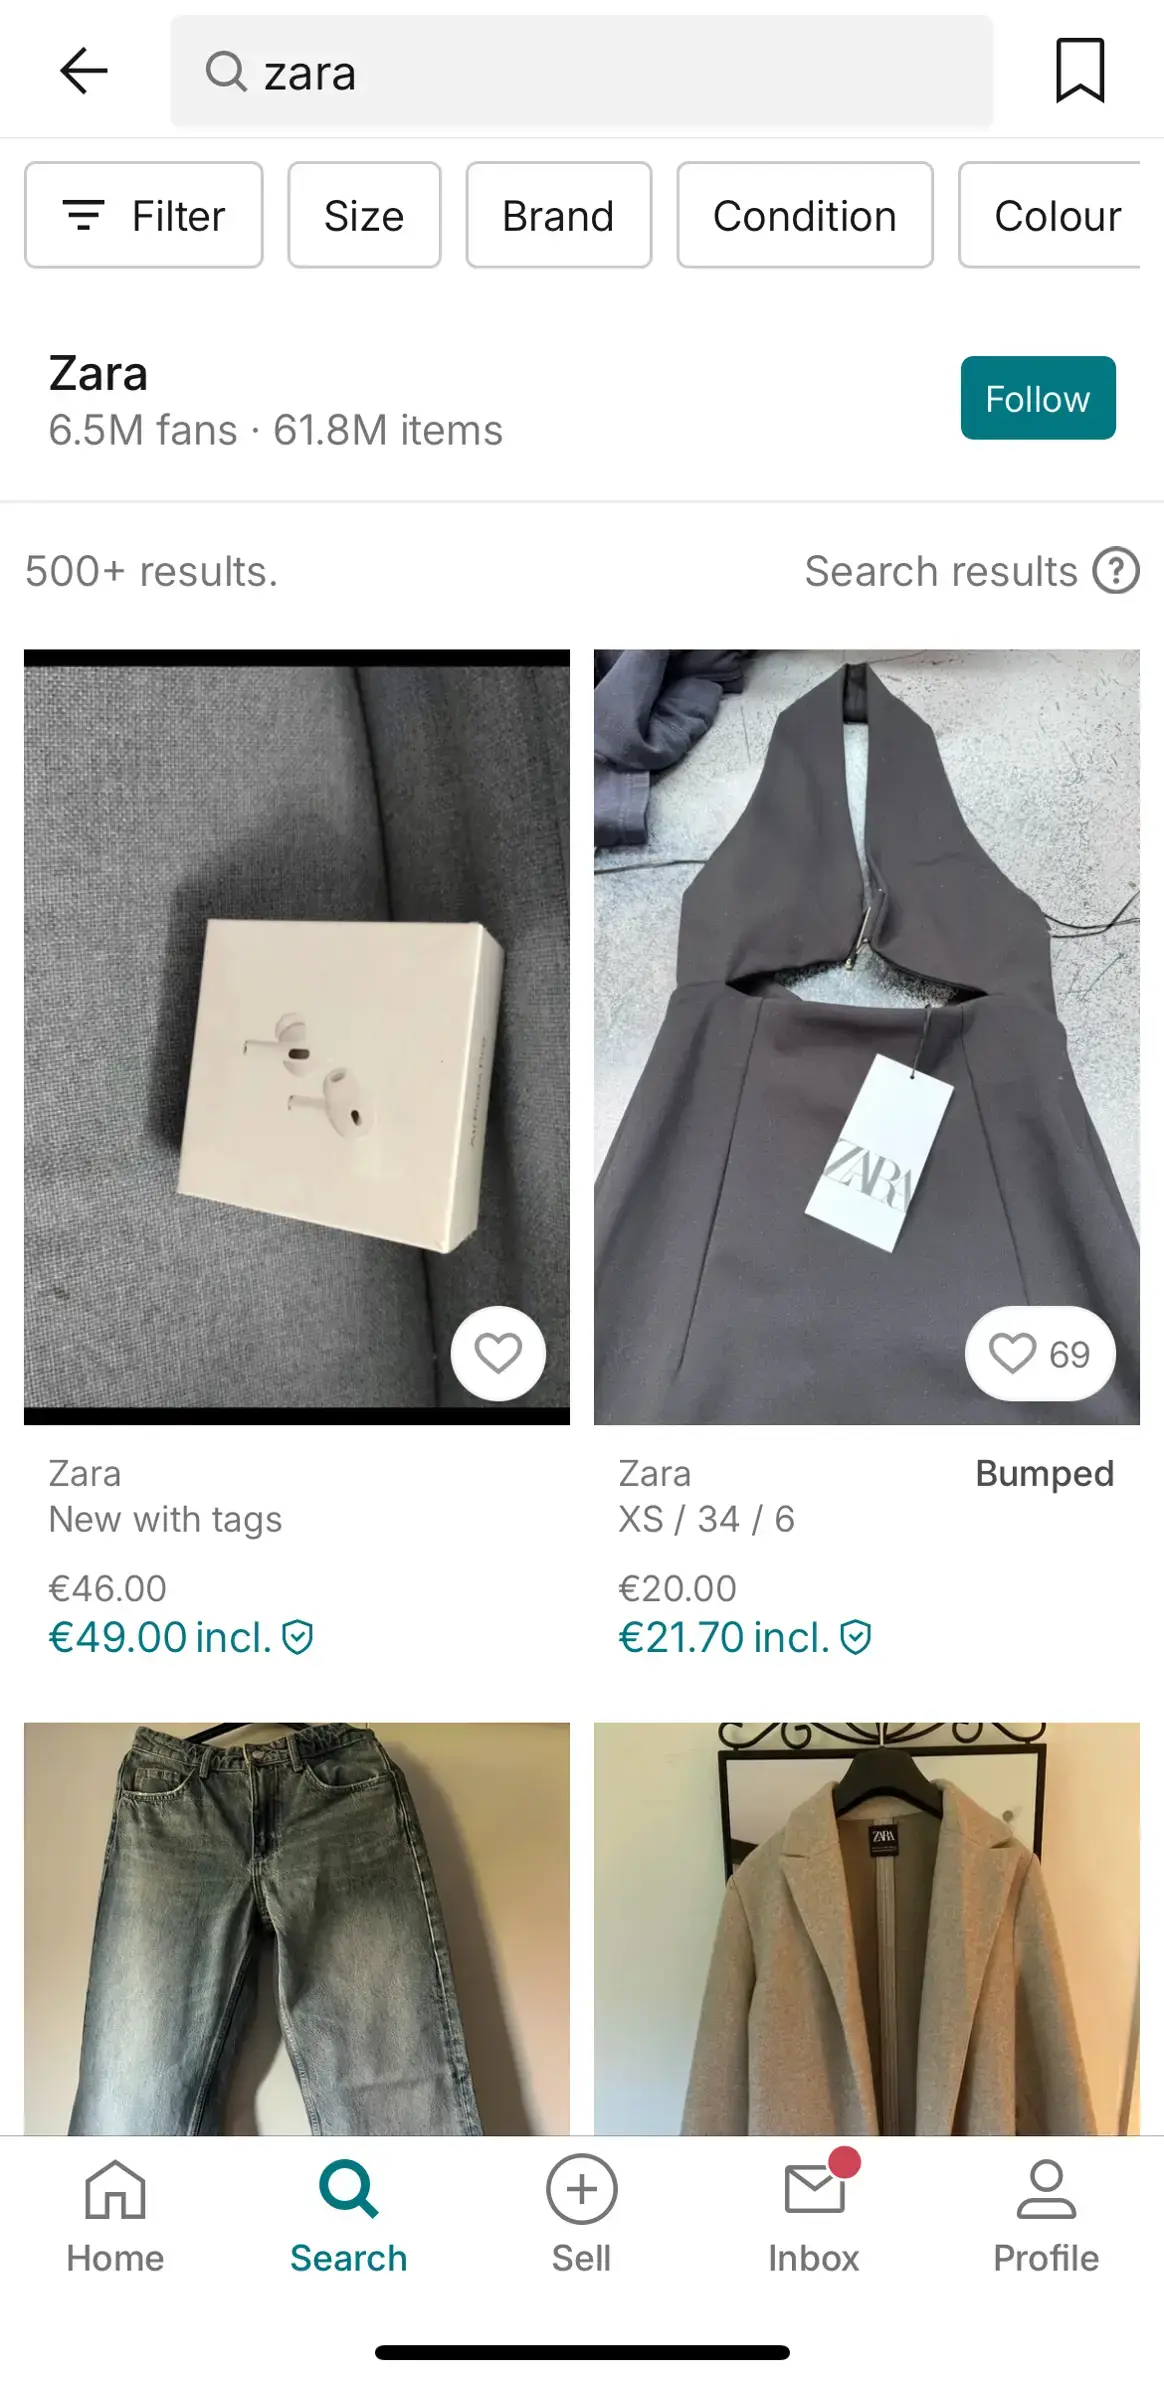 There are 61.8 million Zara items listed for sale on Vinted